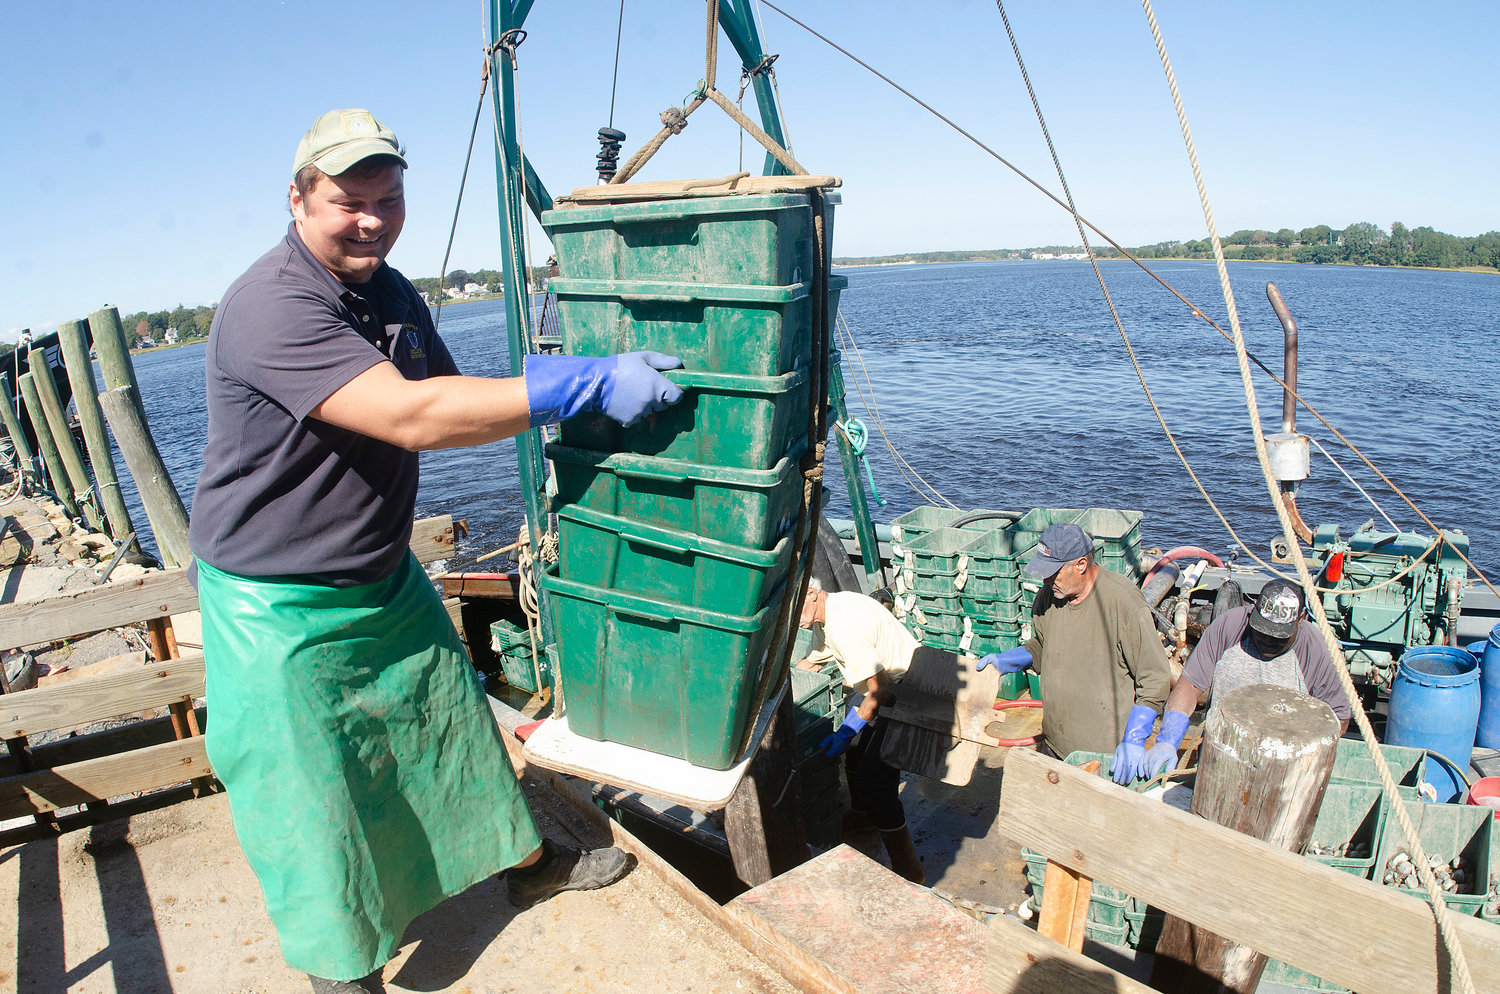 Chris Leonard, Westport's Director of Marine Services, loads containers of quahogs onto a trailer in Fall River early Friday afternoon. They were brought in by the dredger Ocean Rancher and unloaded at Ark Bait.